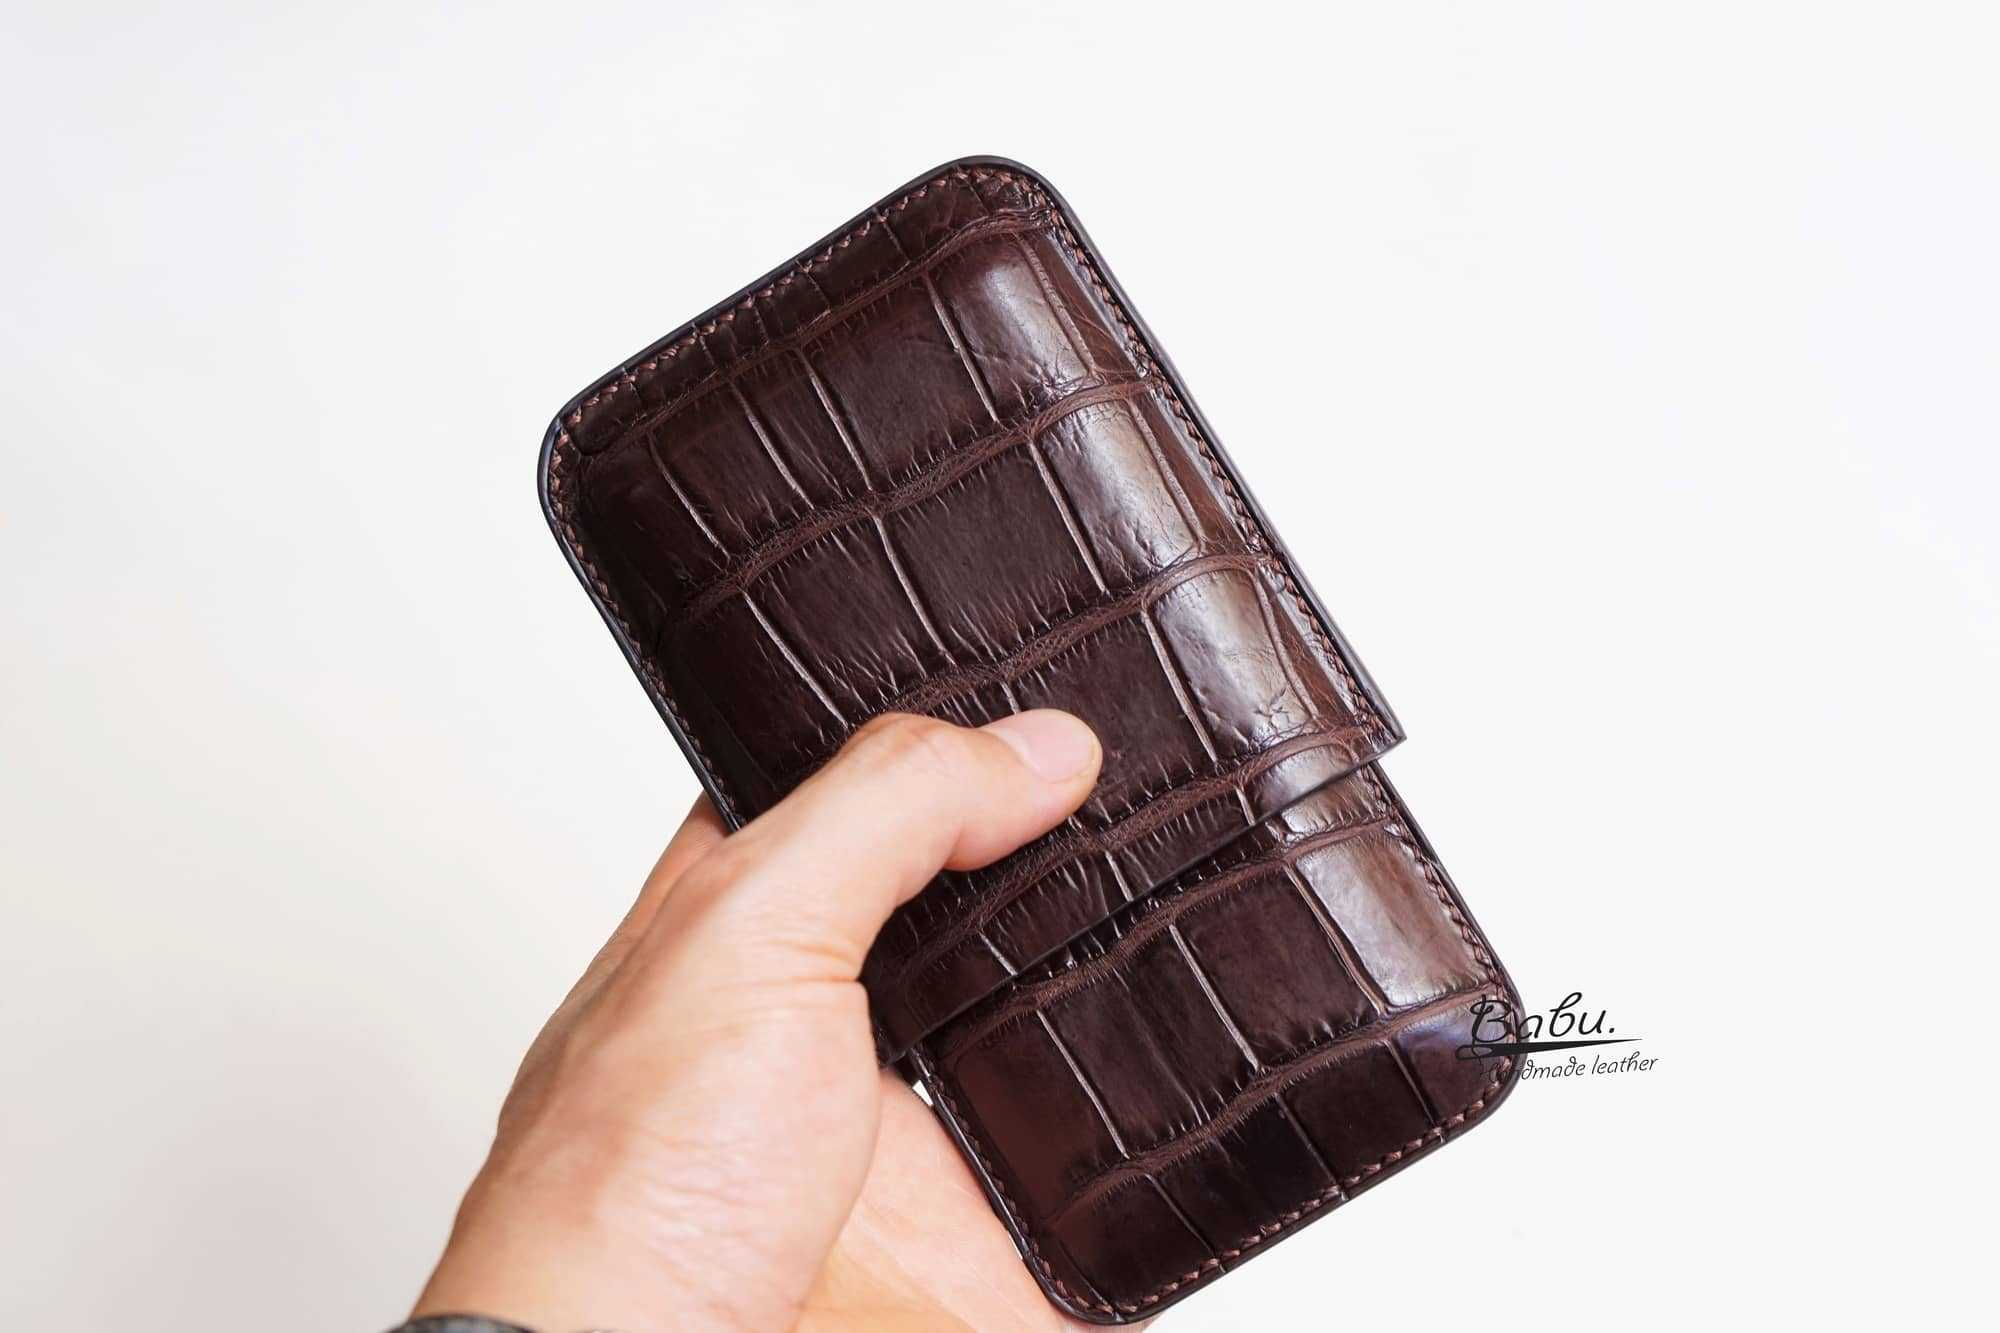 24 Leather Cigar Cases to Protect Your Precious Smokes - Groovy